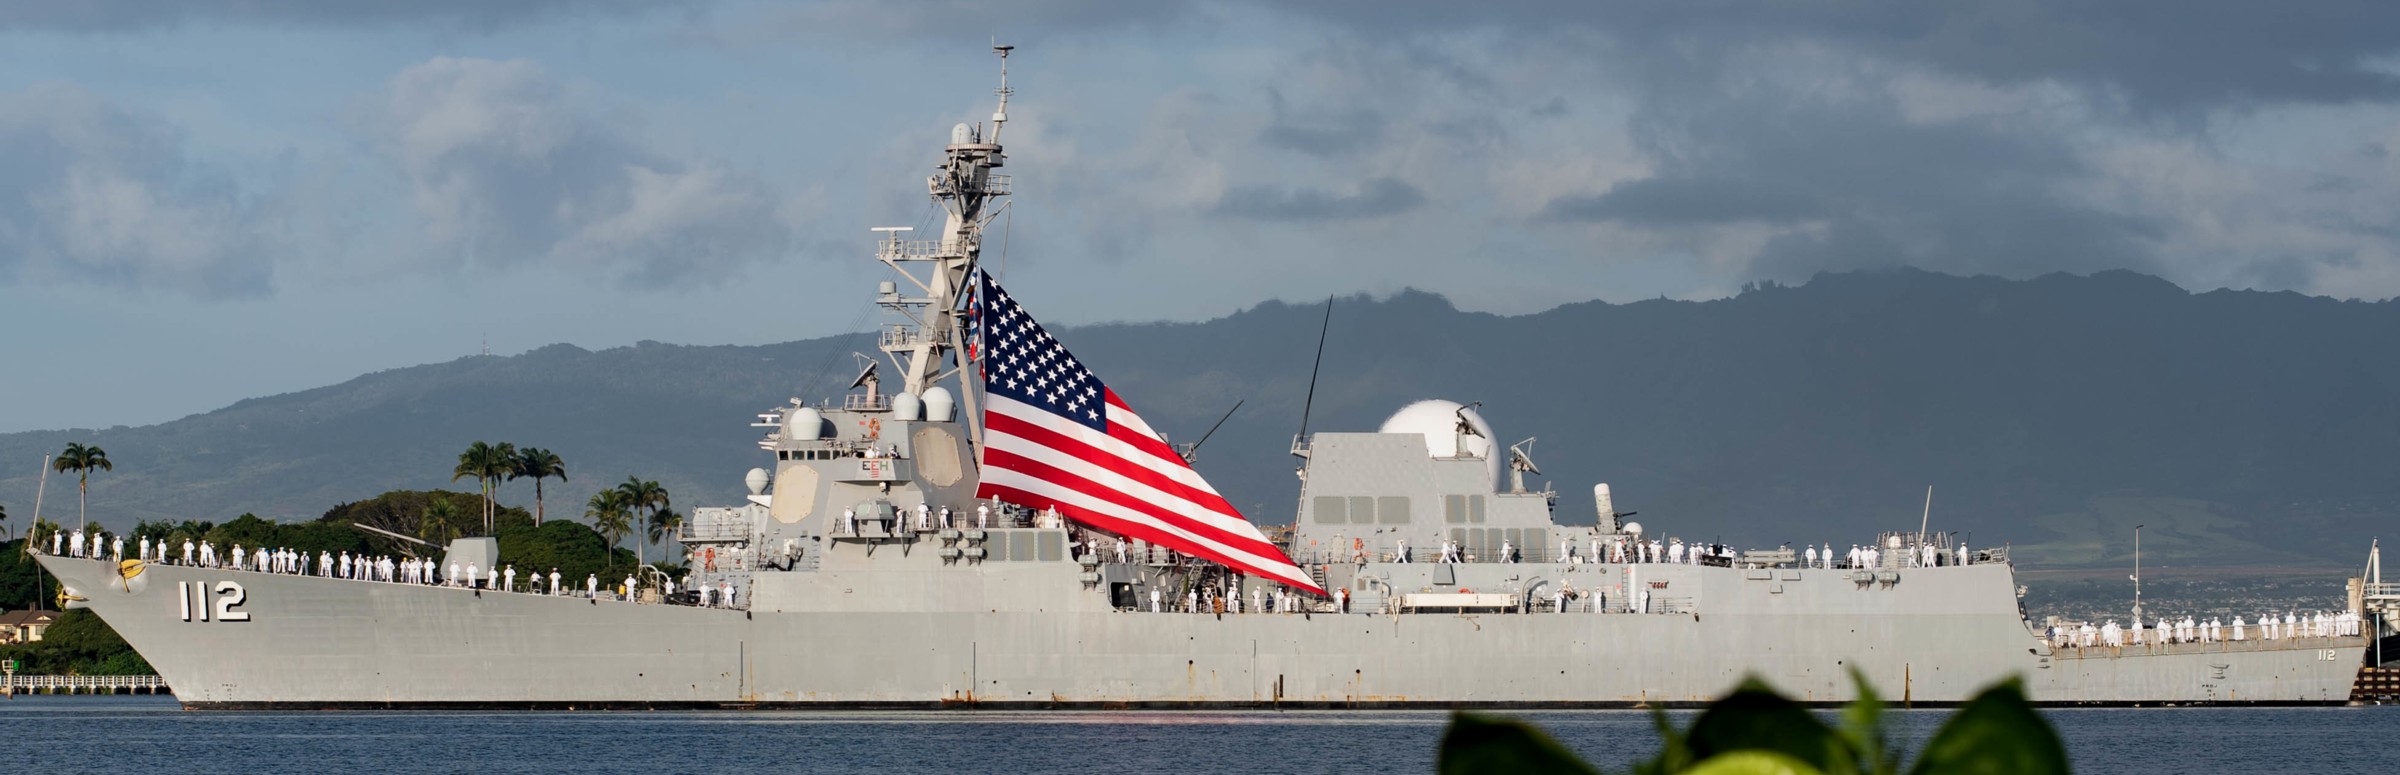 ddg-112 uss michael murphy arleigh burke class guided missile destroyer aegis us navy remembrance day pearl harbor hawaii 74